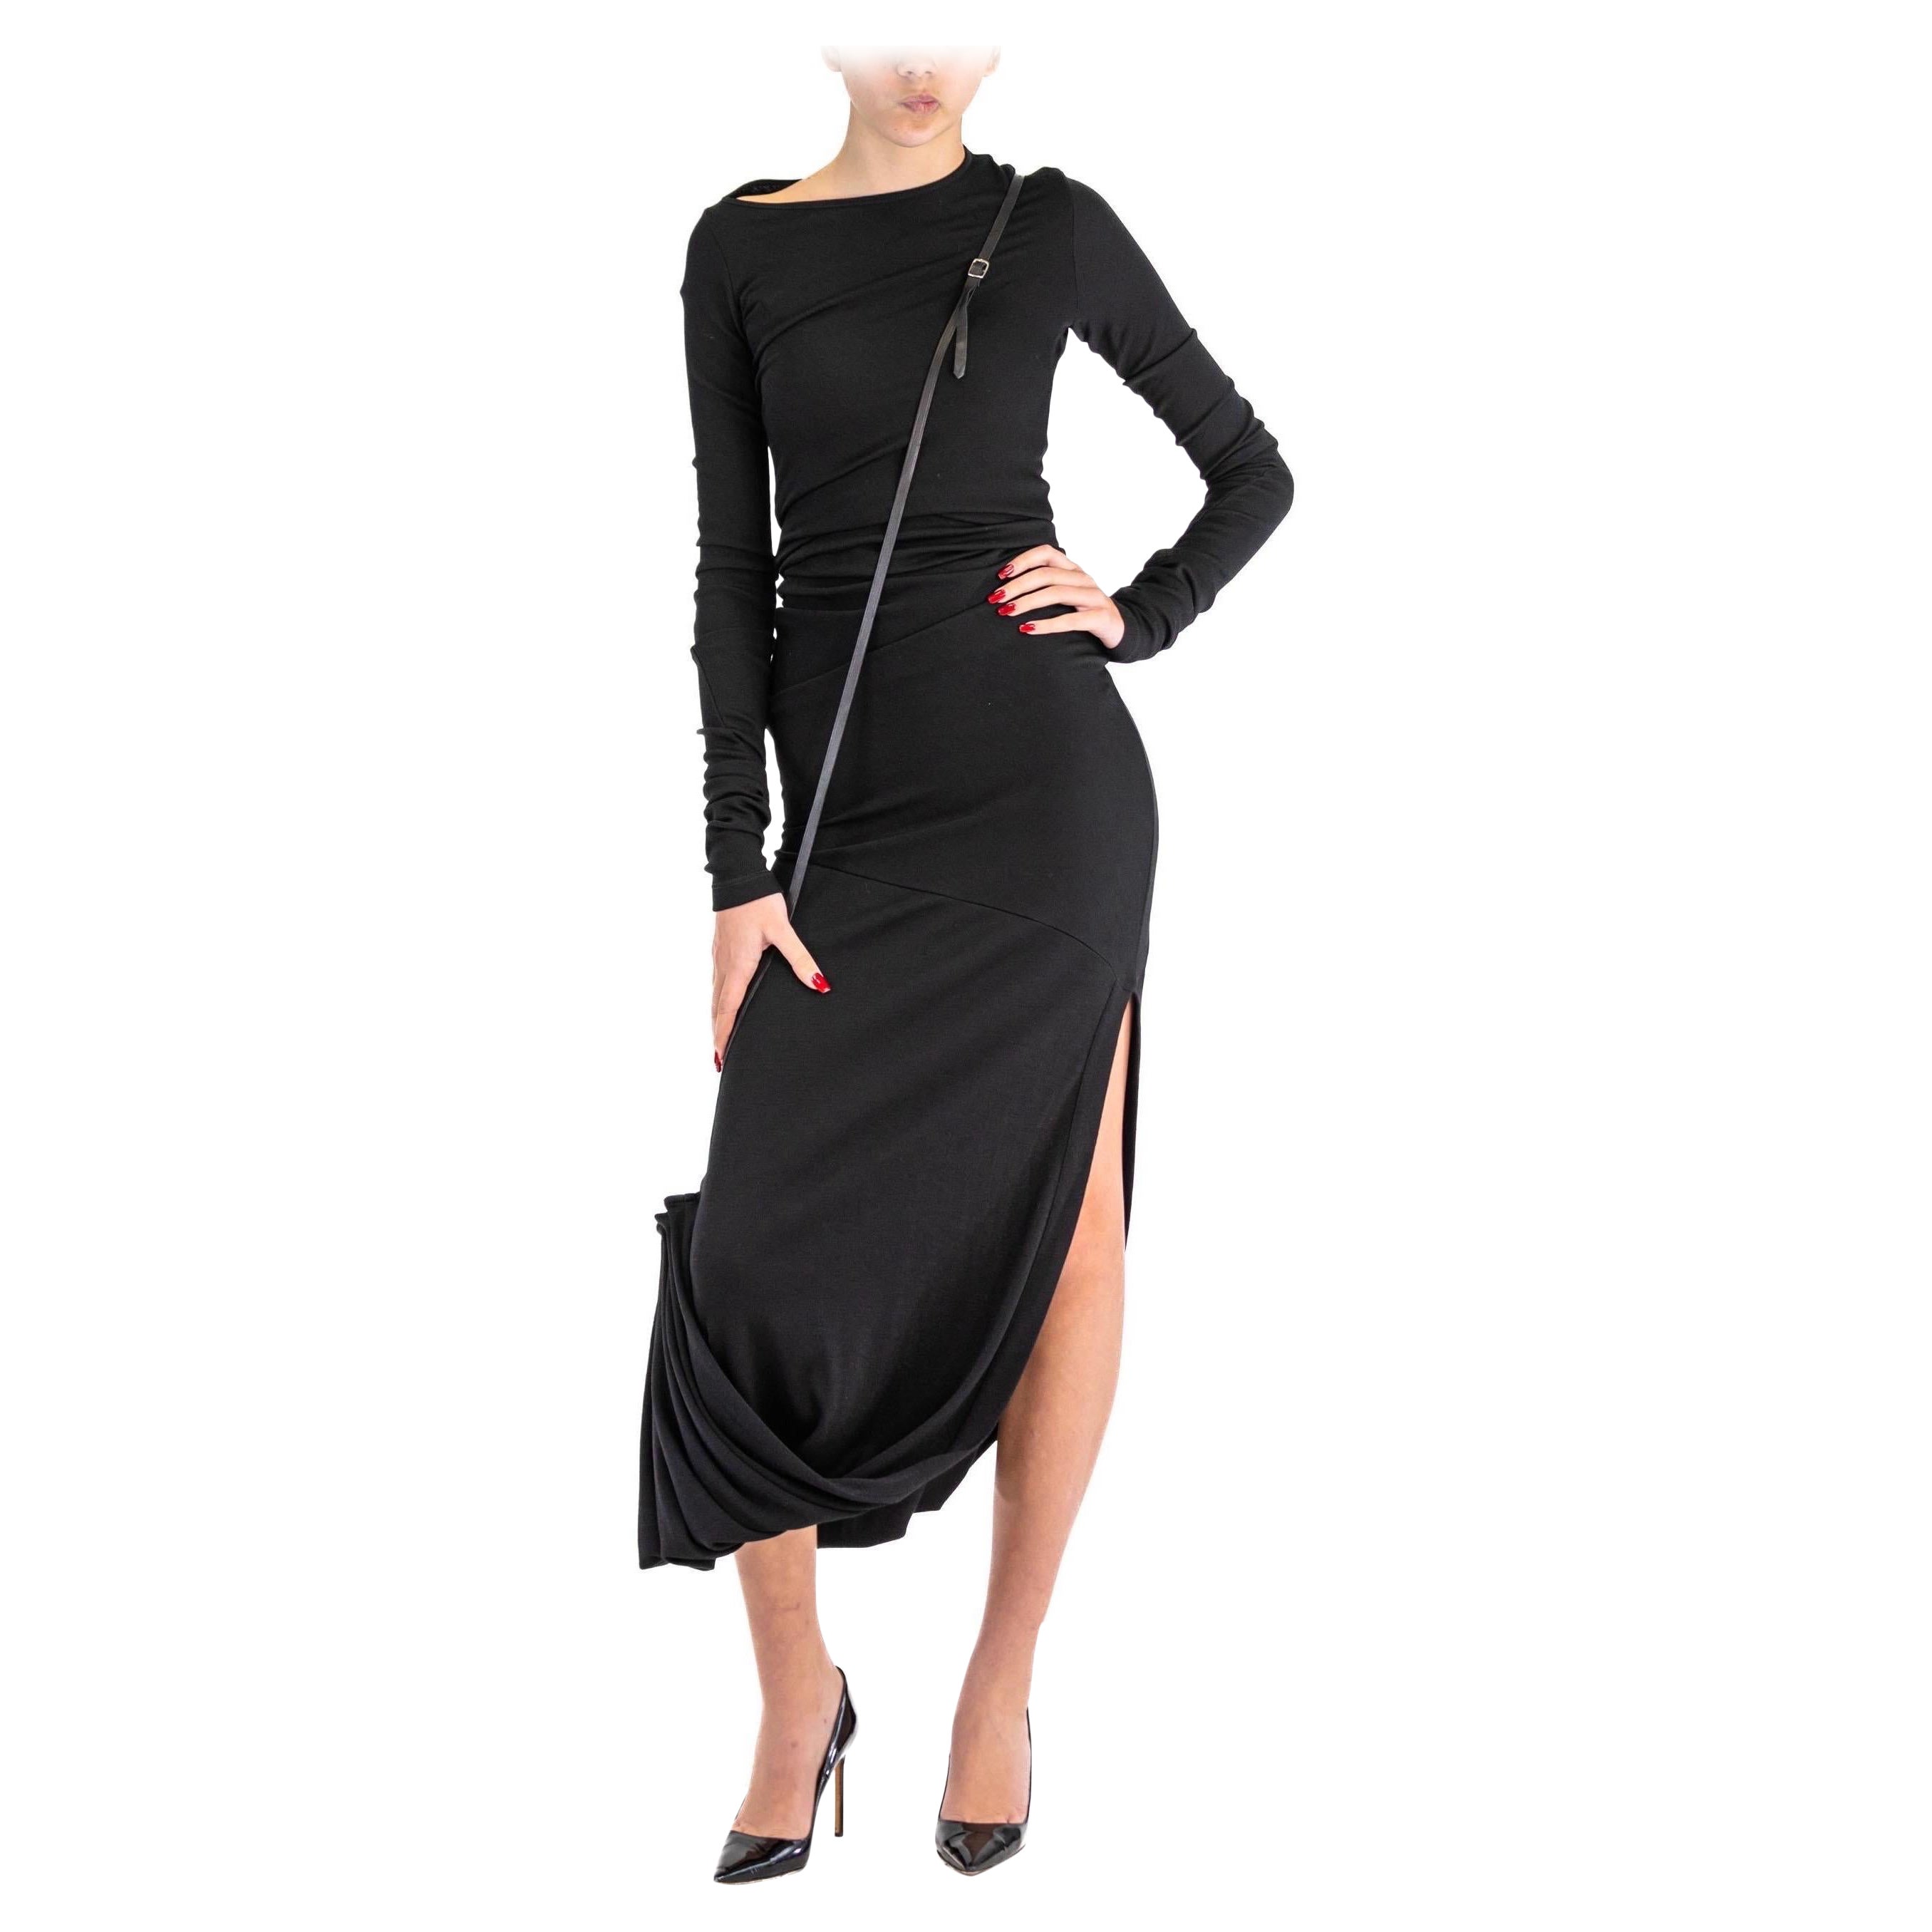 1990S JEAN PAUL GAULTIER Black Wool Blend Knit Dress With Draped Sash For Sale